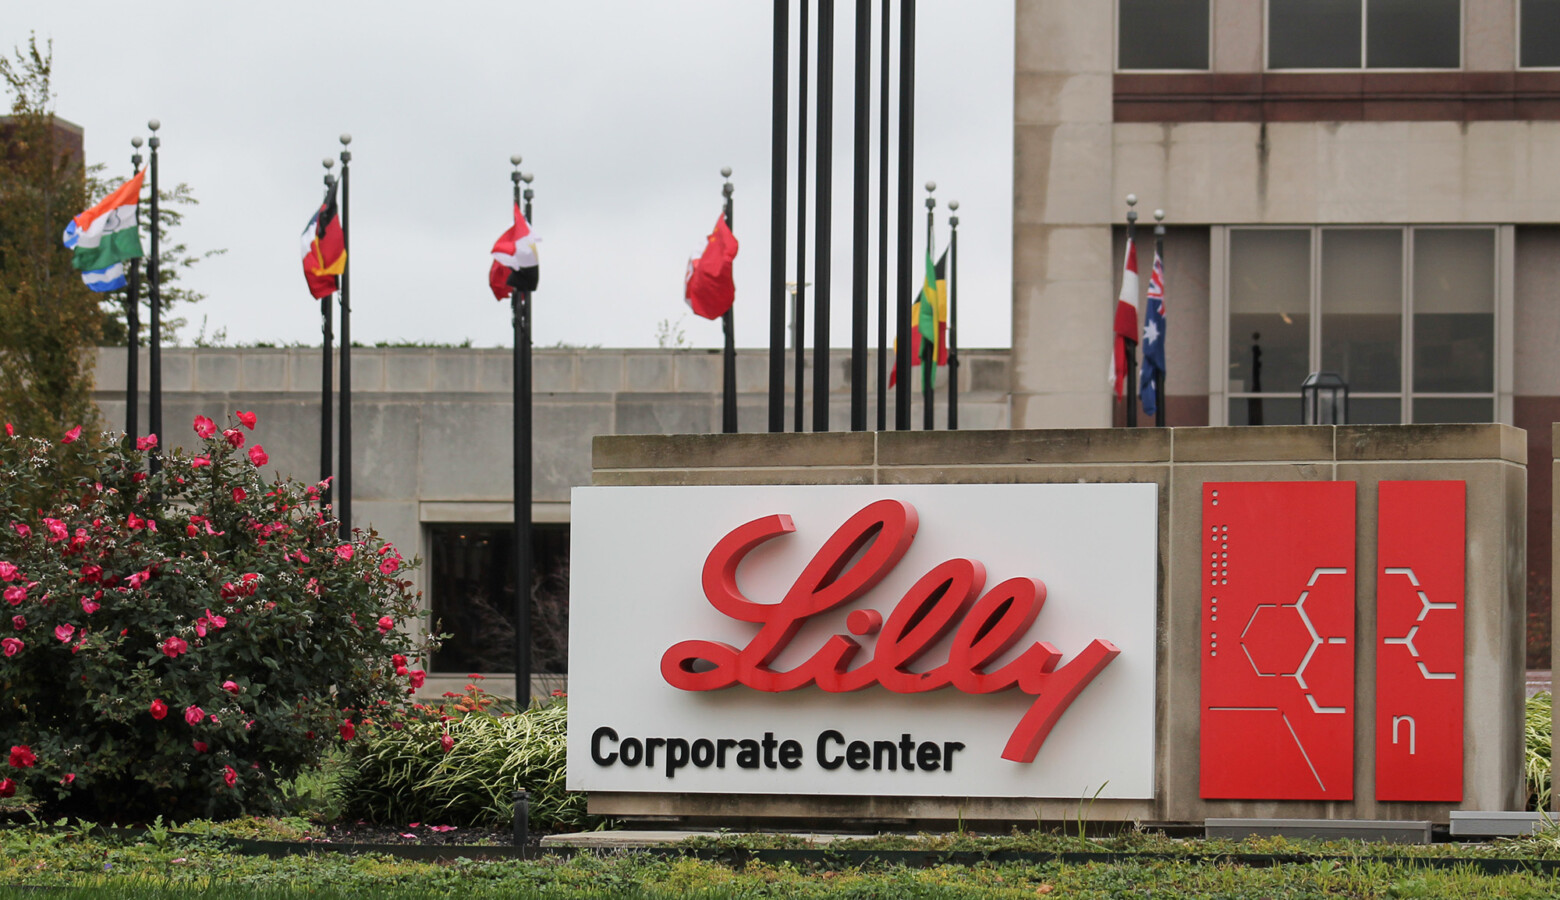 Eli Lilly's Corporate Headquarters in Indianapolis. The company's political action committee is suspending donations for U.S. members of Congress that voted against certifying the 2020 election results. (Lauren Chapman/IPB News)